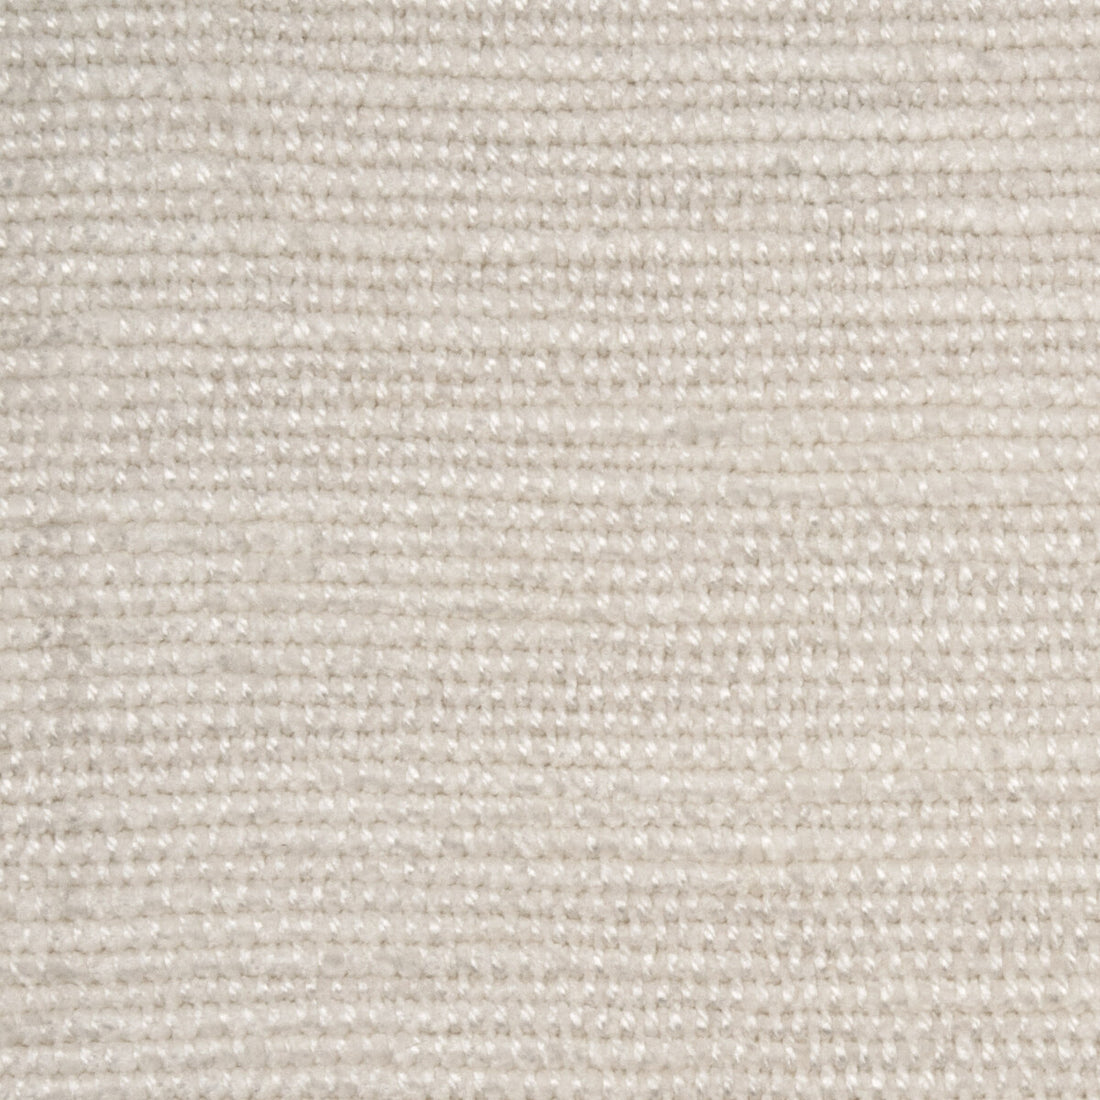 Charisma fabric in white color - pattern ED85189.100.0 - by Threads in the Threads Colour Library collection